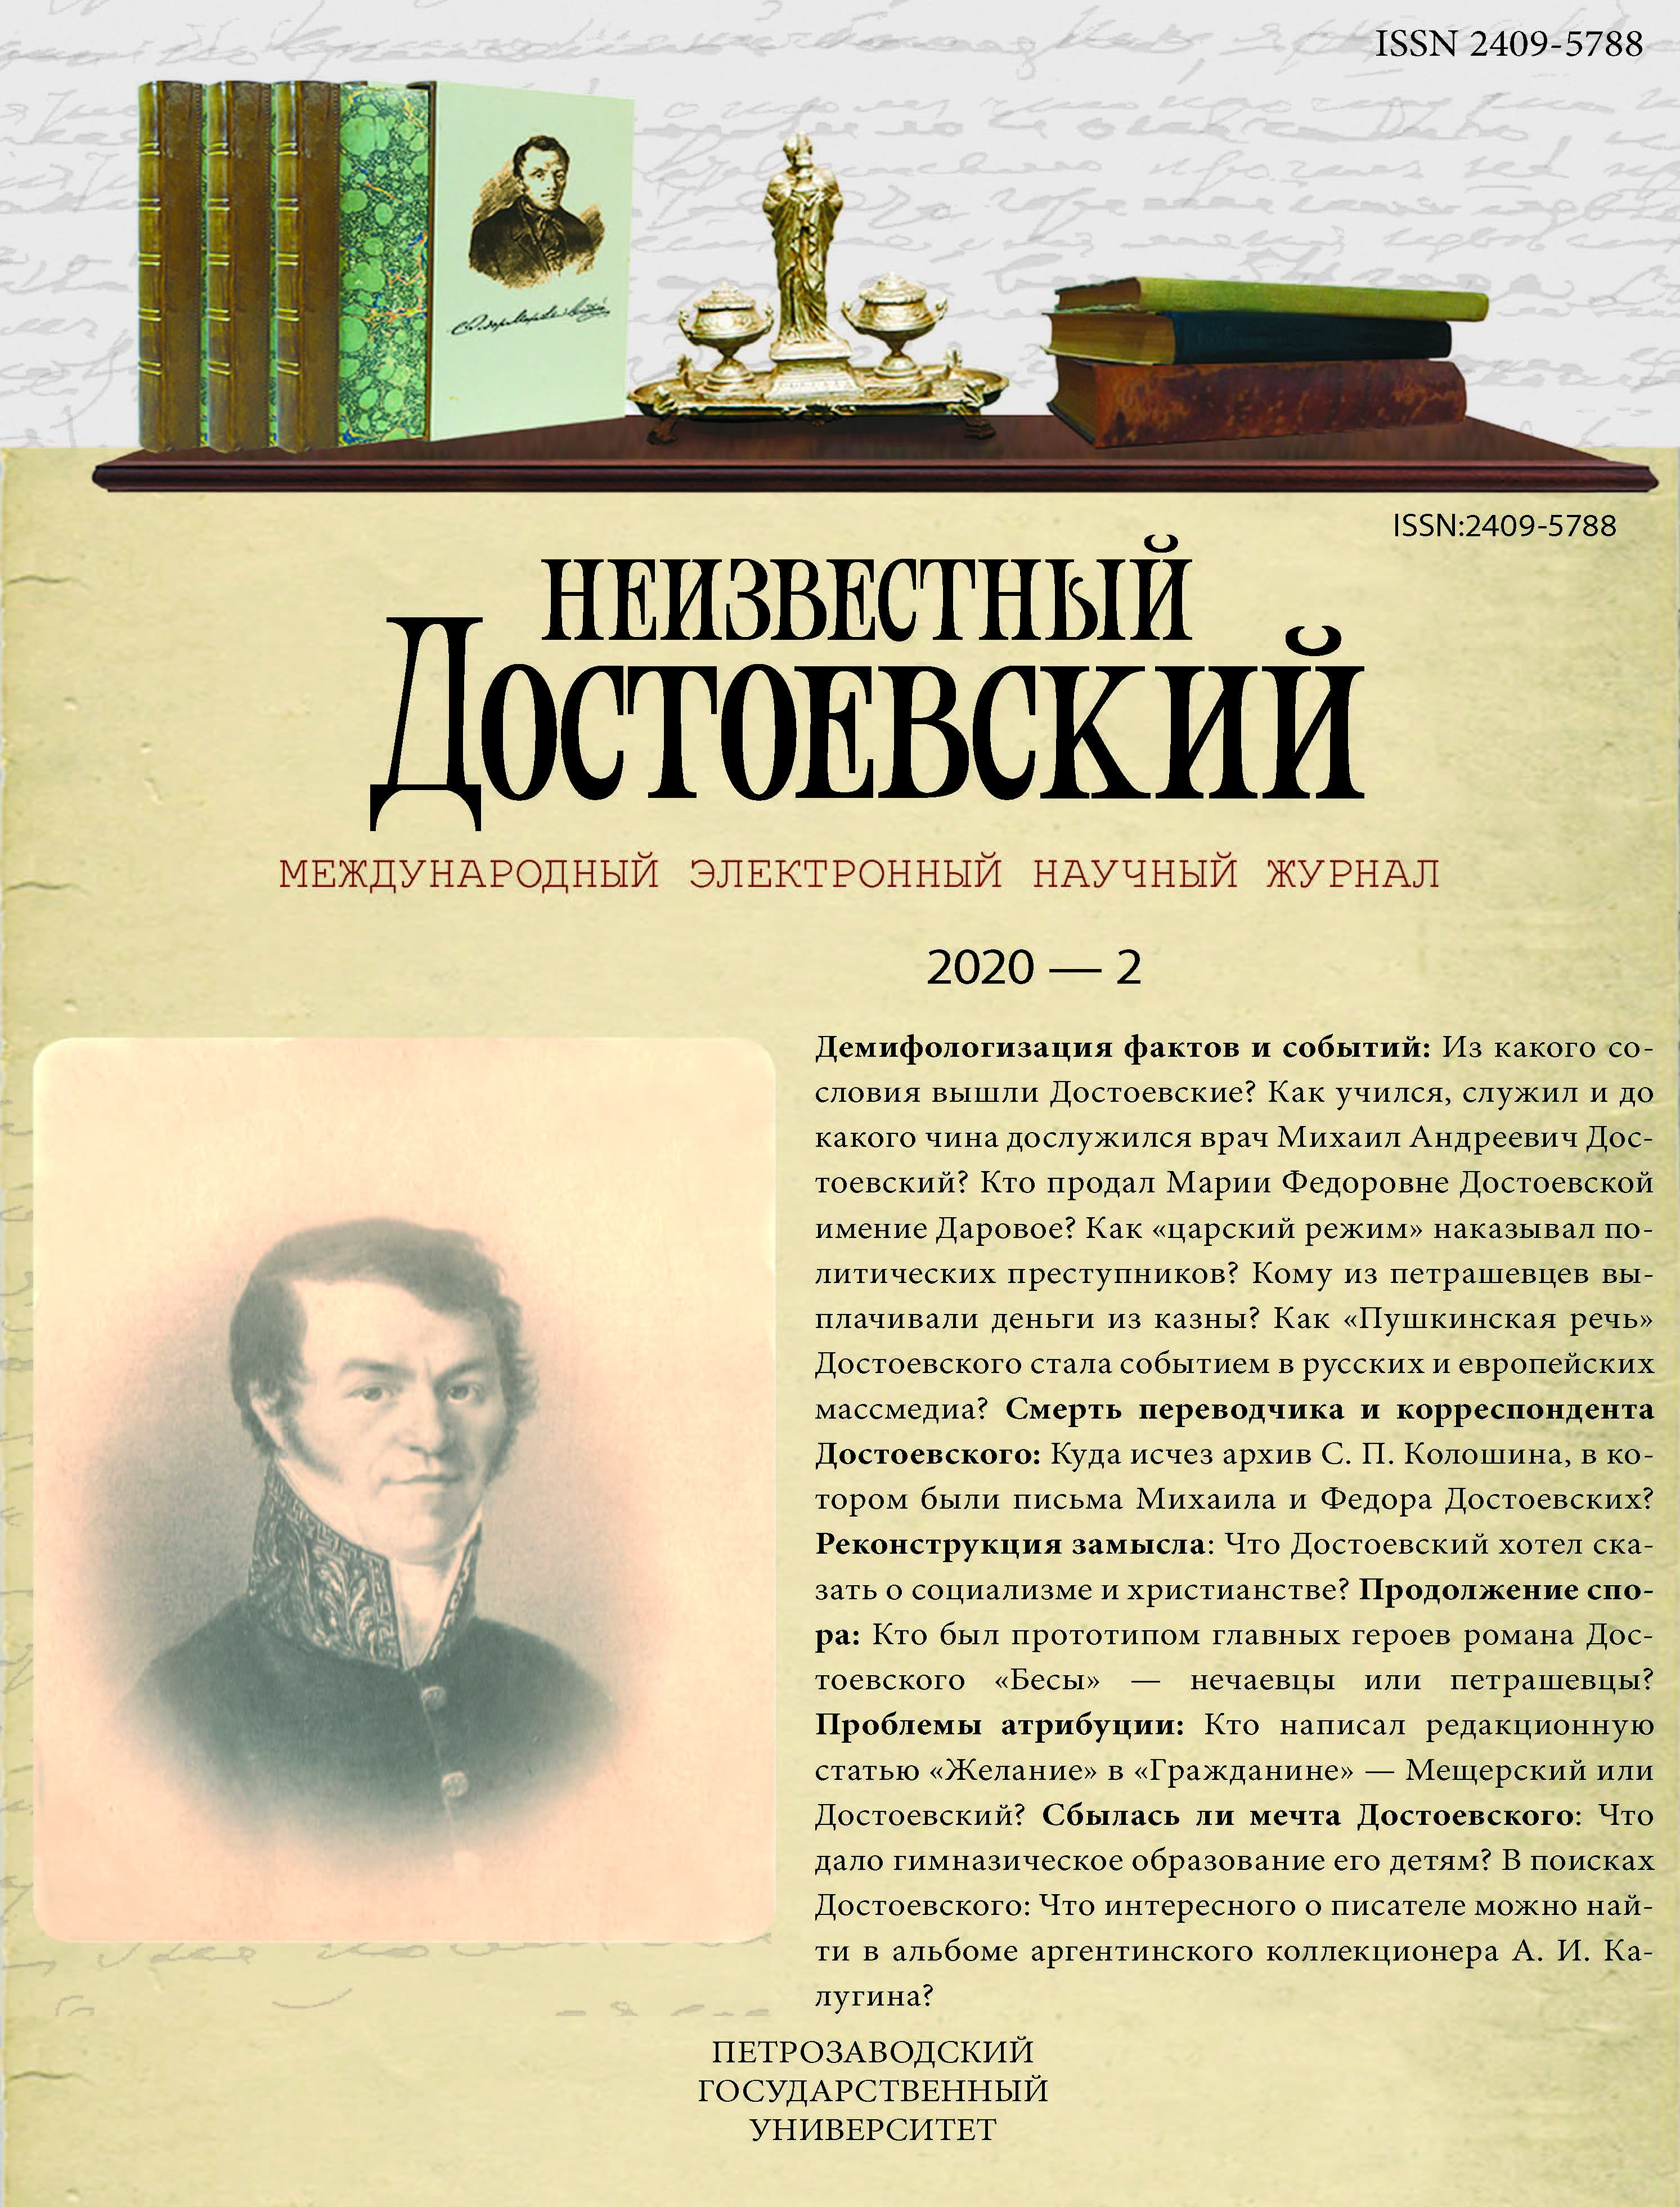 Who is the Author of the Editorial “Zhelanie” (“Desire”) in the First Issue of "Grazhdanin" ("Citizen") for 1873? Cover Image